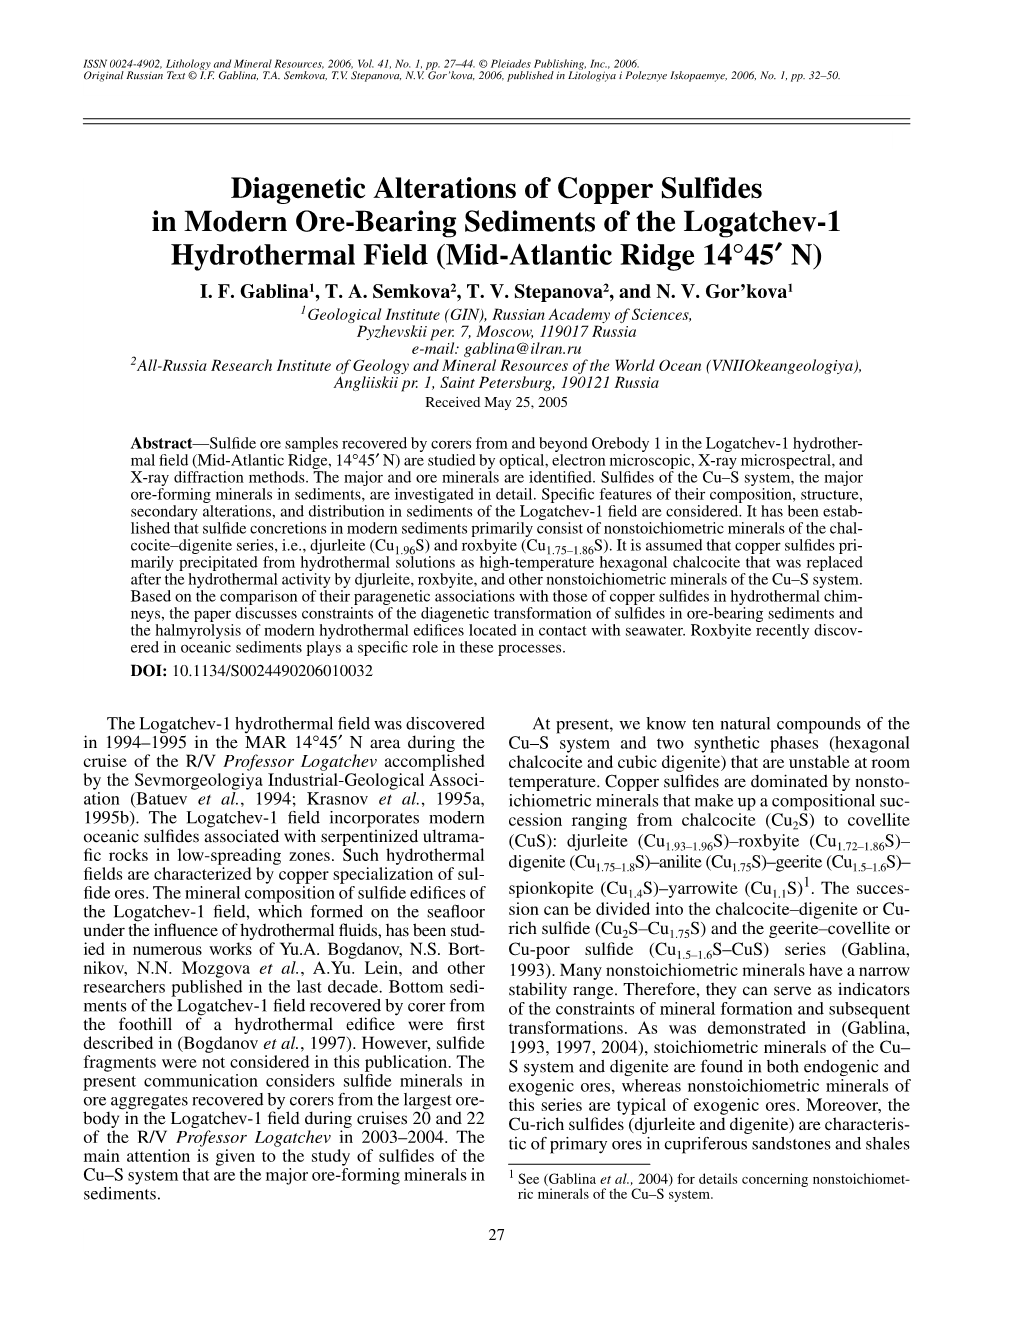 Diagenetic Alterations of Copper Sulfides in Modern Ore-Bearing Sediments of the Logatchev-1 Hydrothermal Field (Mid-Atlantic Ridge 14°45¢ N) I